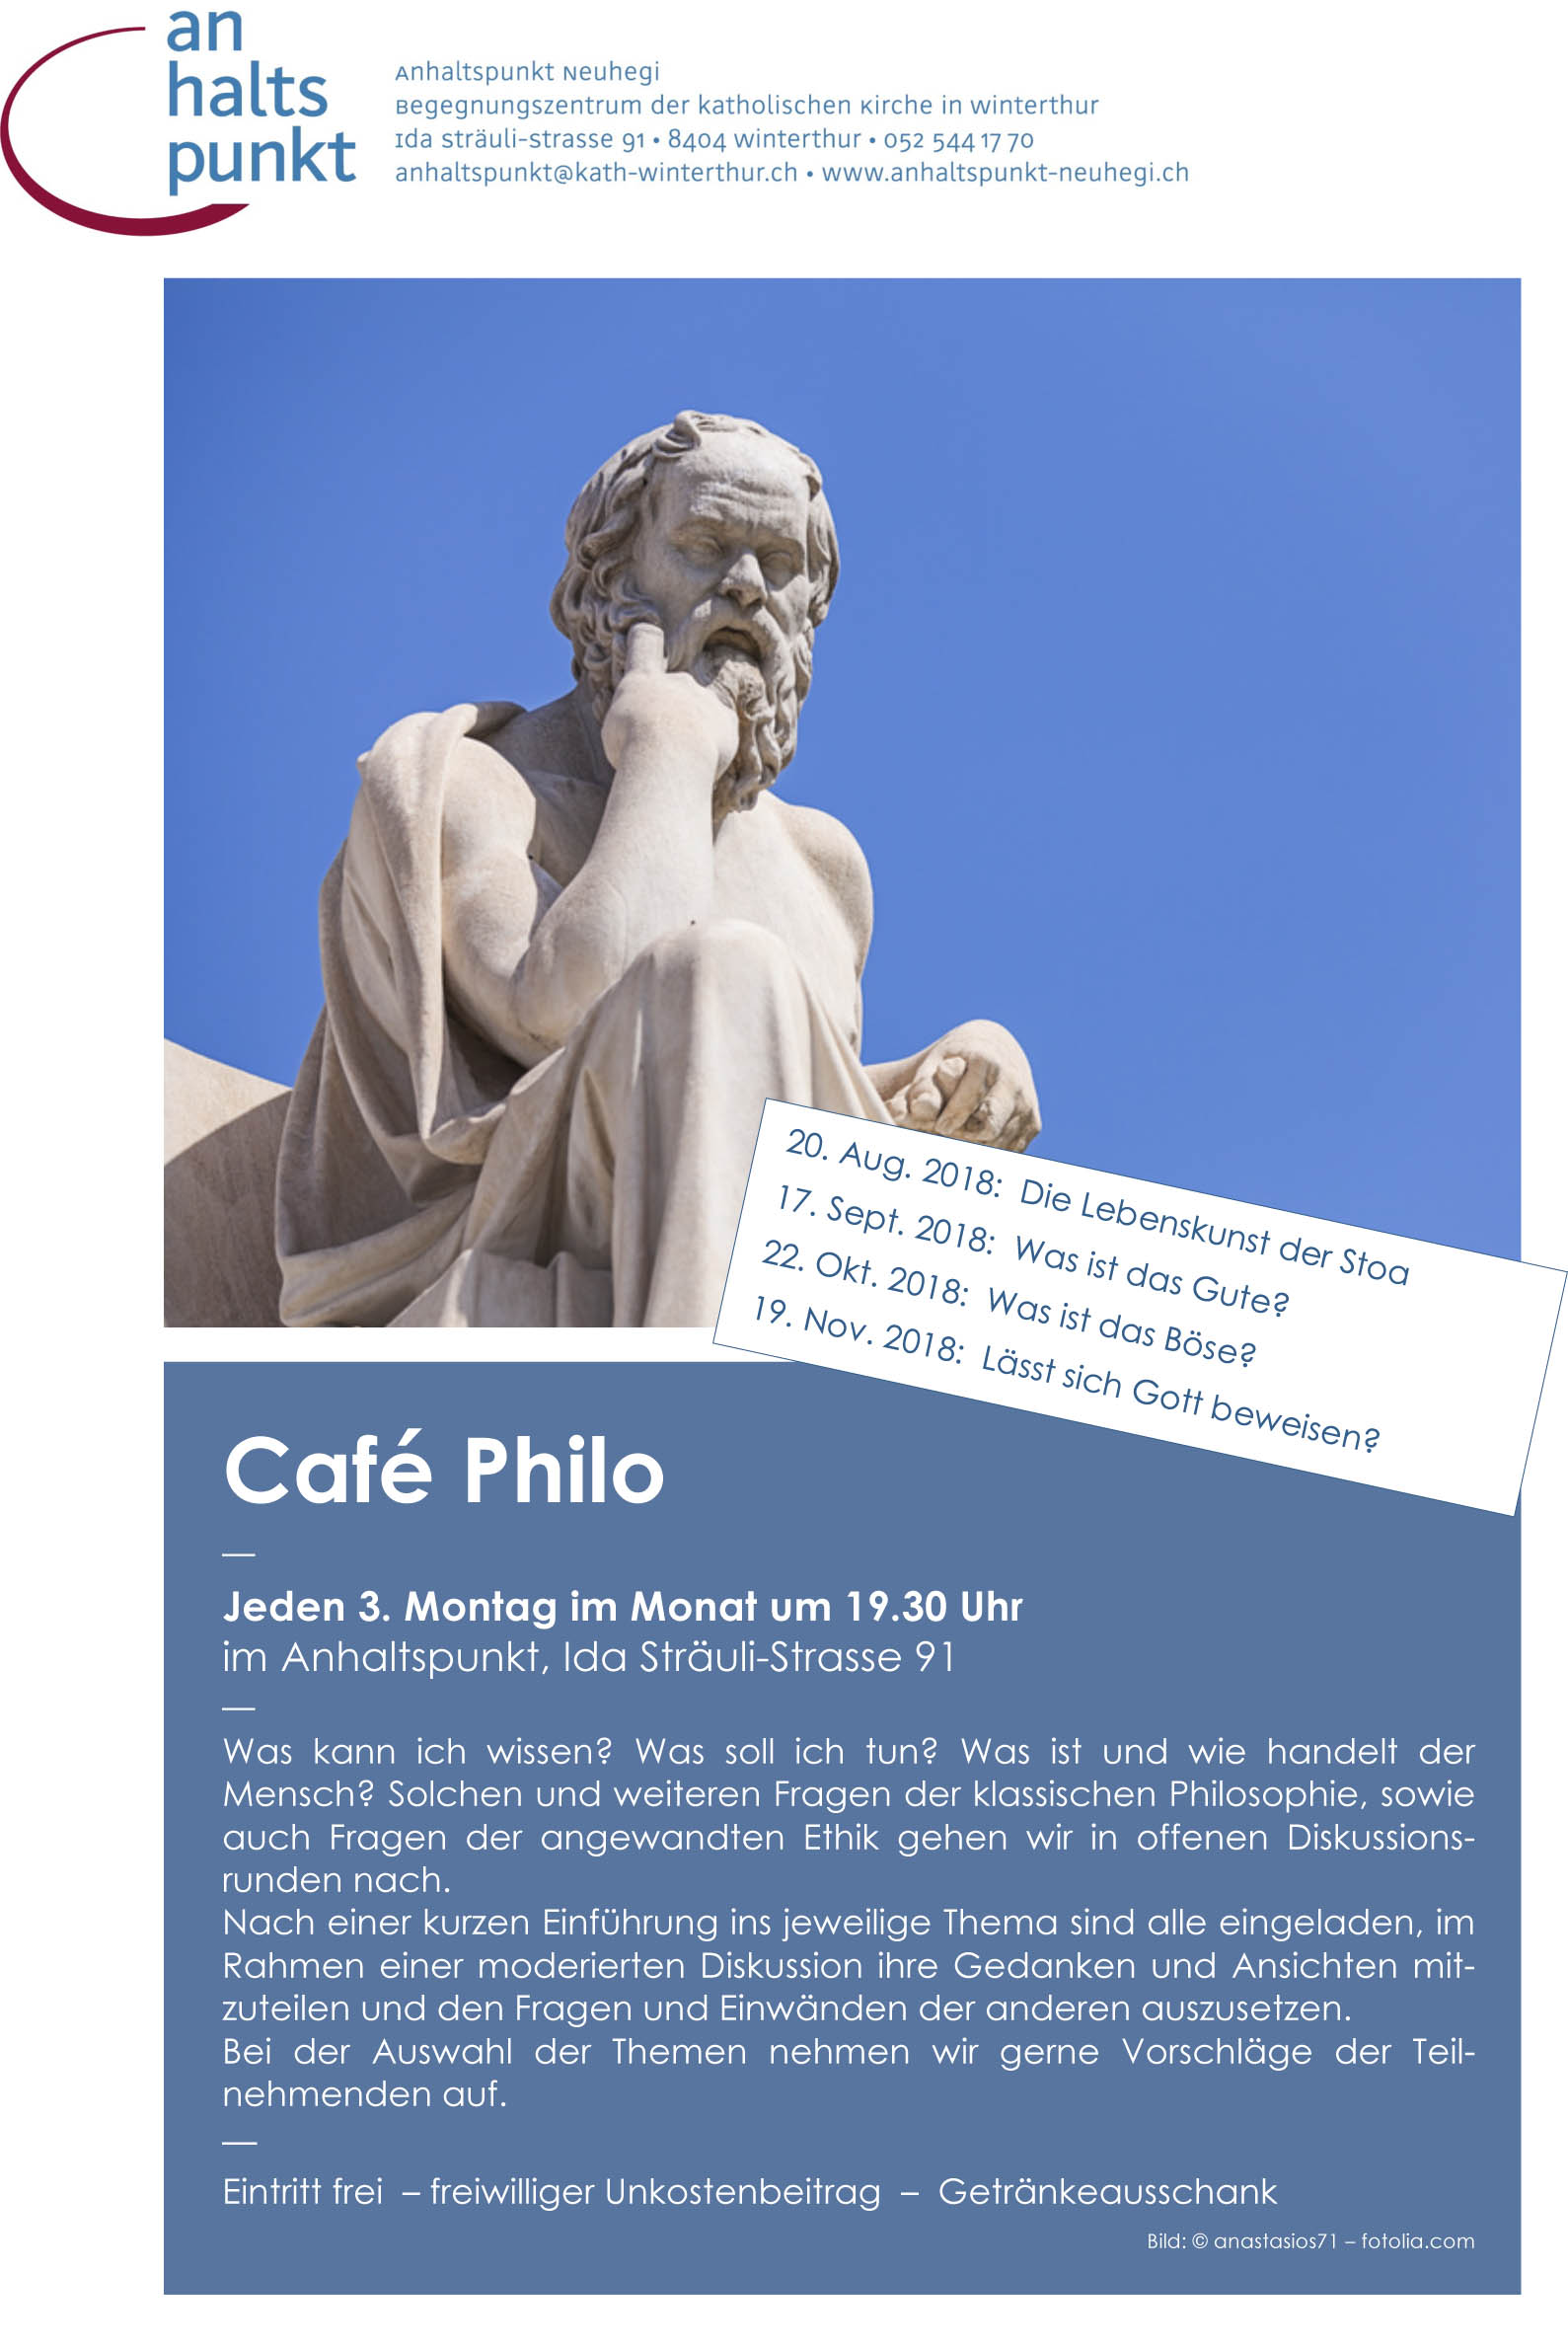 ahp Cafe Philo 18 2